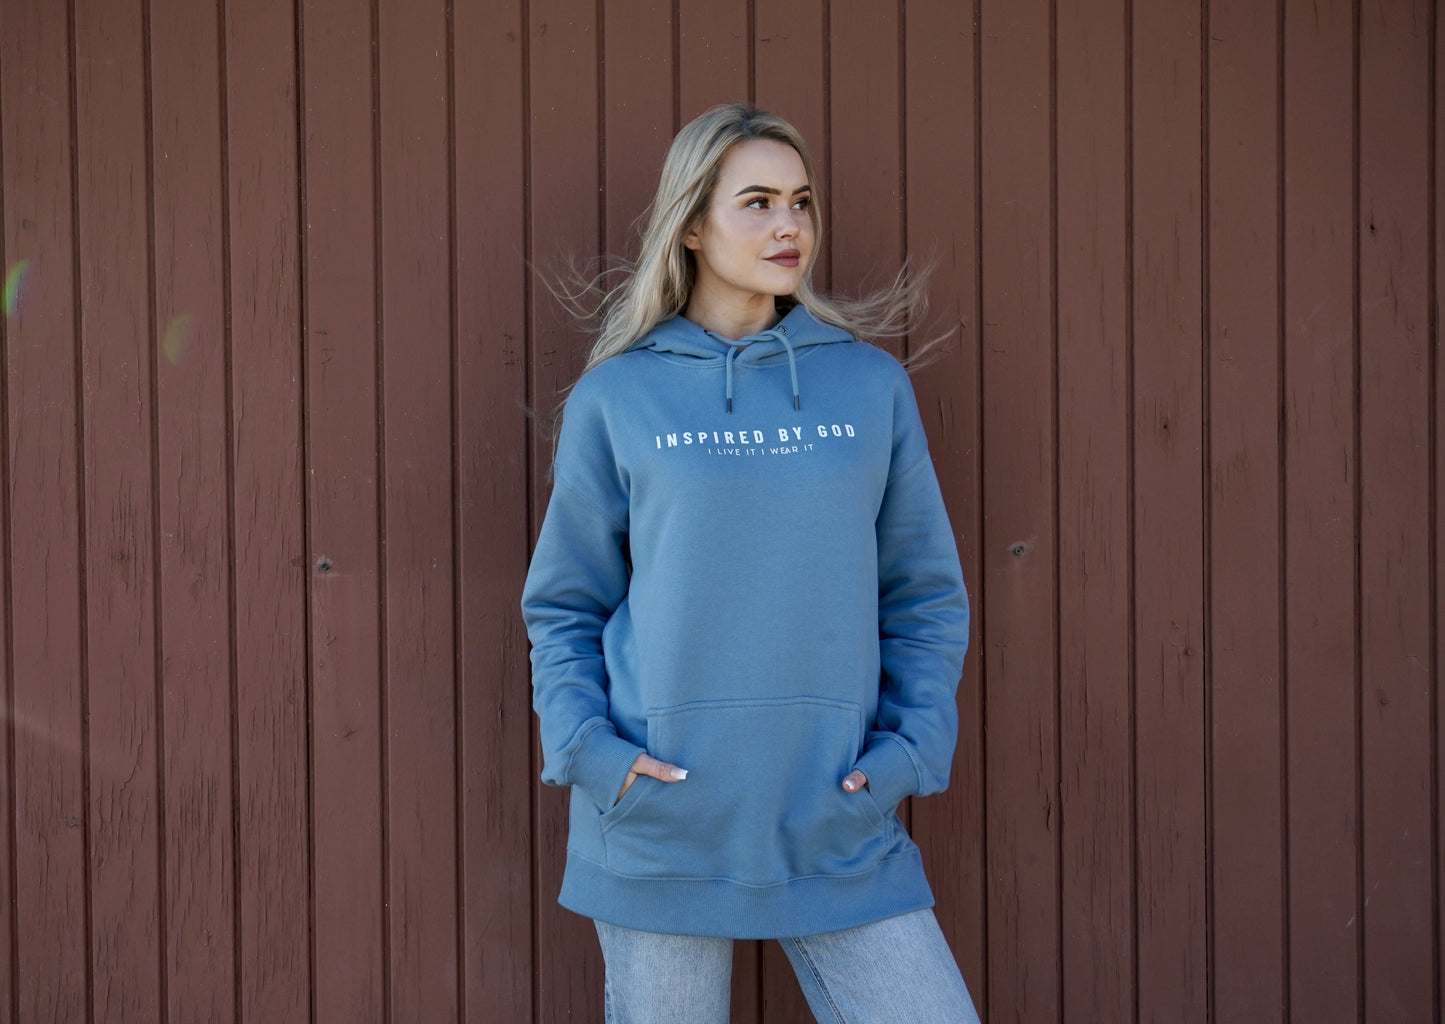 Premium heavyweight hoodie dropped shoulder Blue D. - Inspired By God